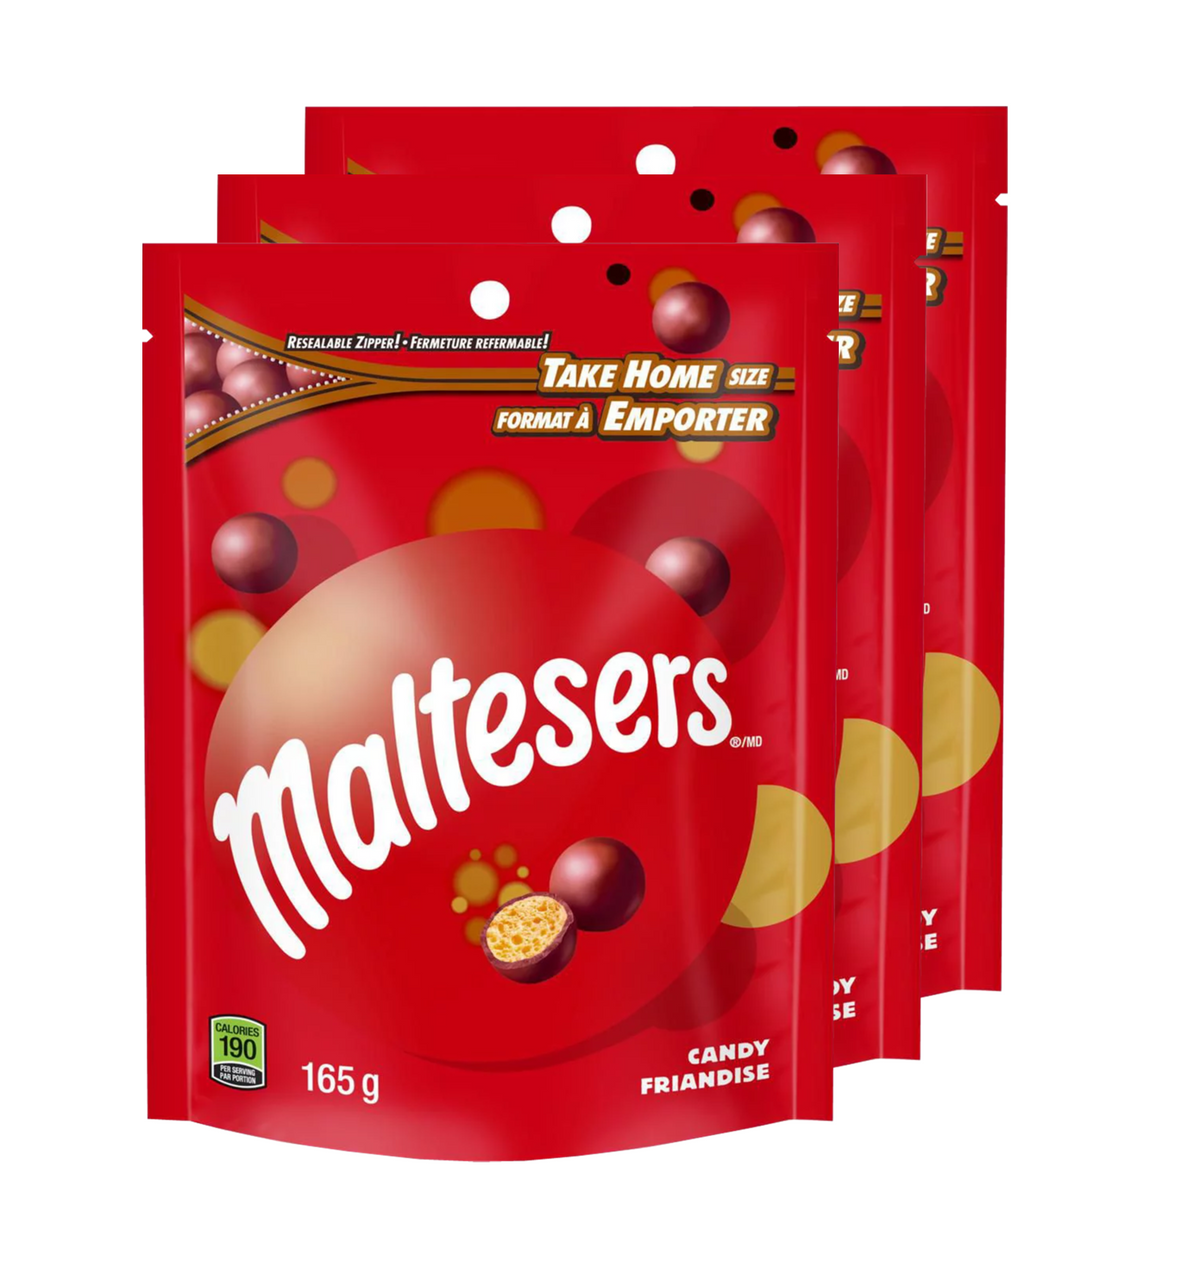 Maltesers Crunchy Chocolate balls - Celebration Size - 800g/1.7lbs.  {Imported from Canada}